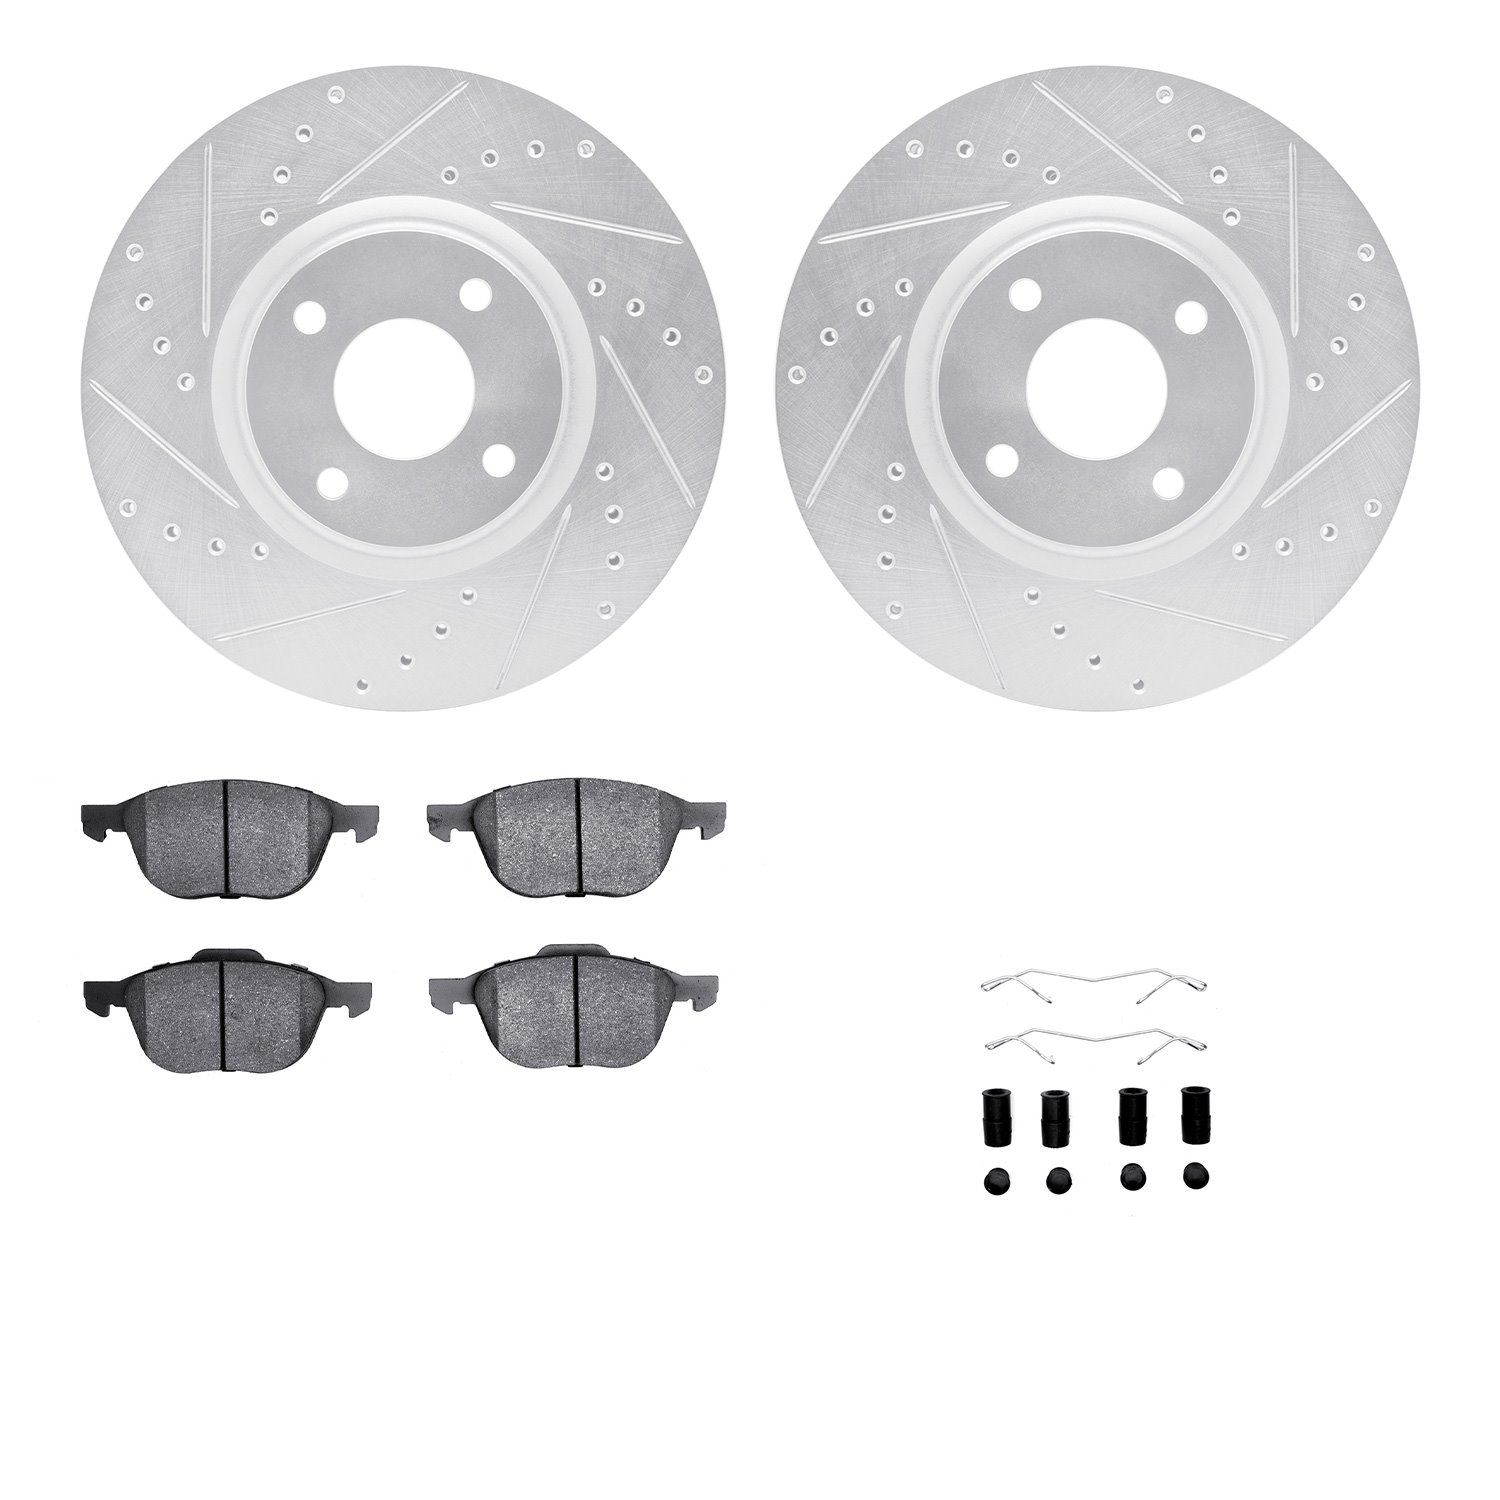 7612-54027 Drilled/Slotted Brake Rotors w/5000 Euro Ceramic Brake Pads Kit & Hardware [Silver], Fits Select Ford/Lincoln/Mercury